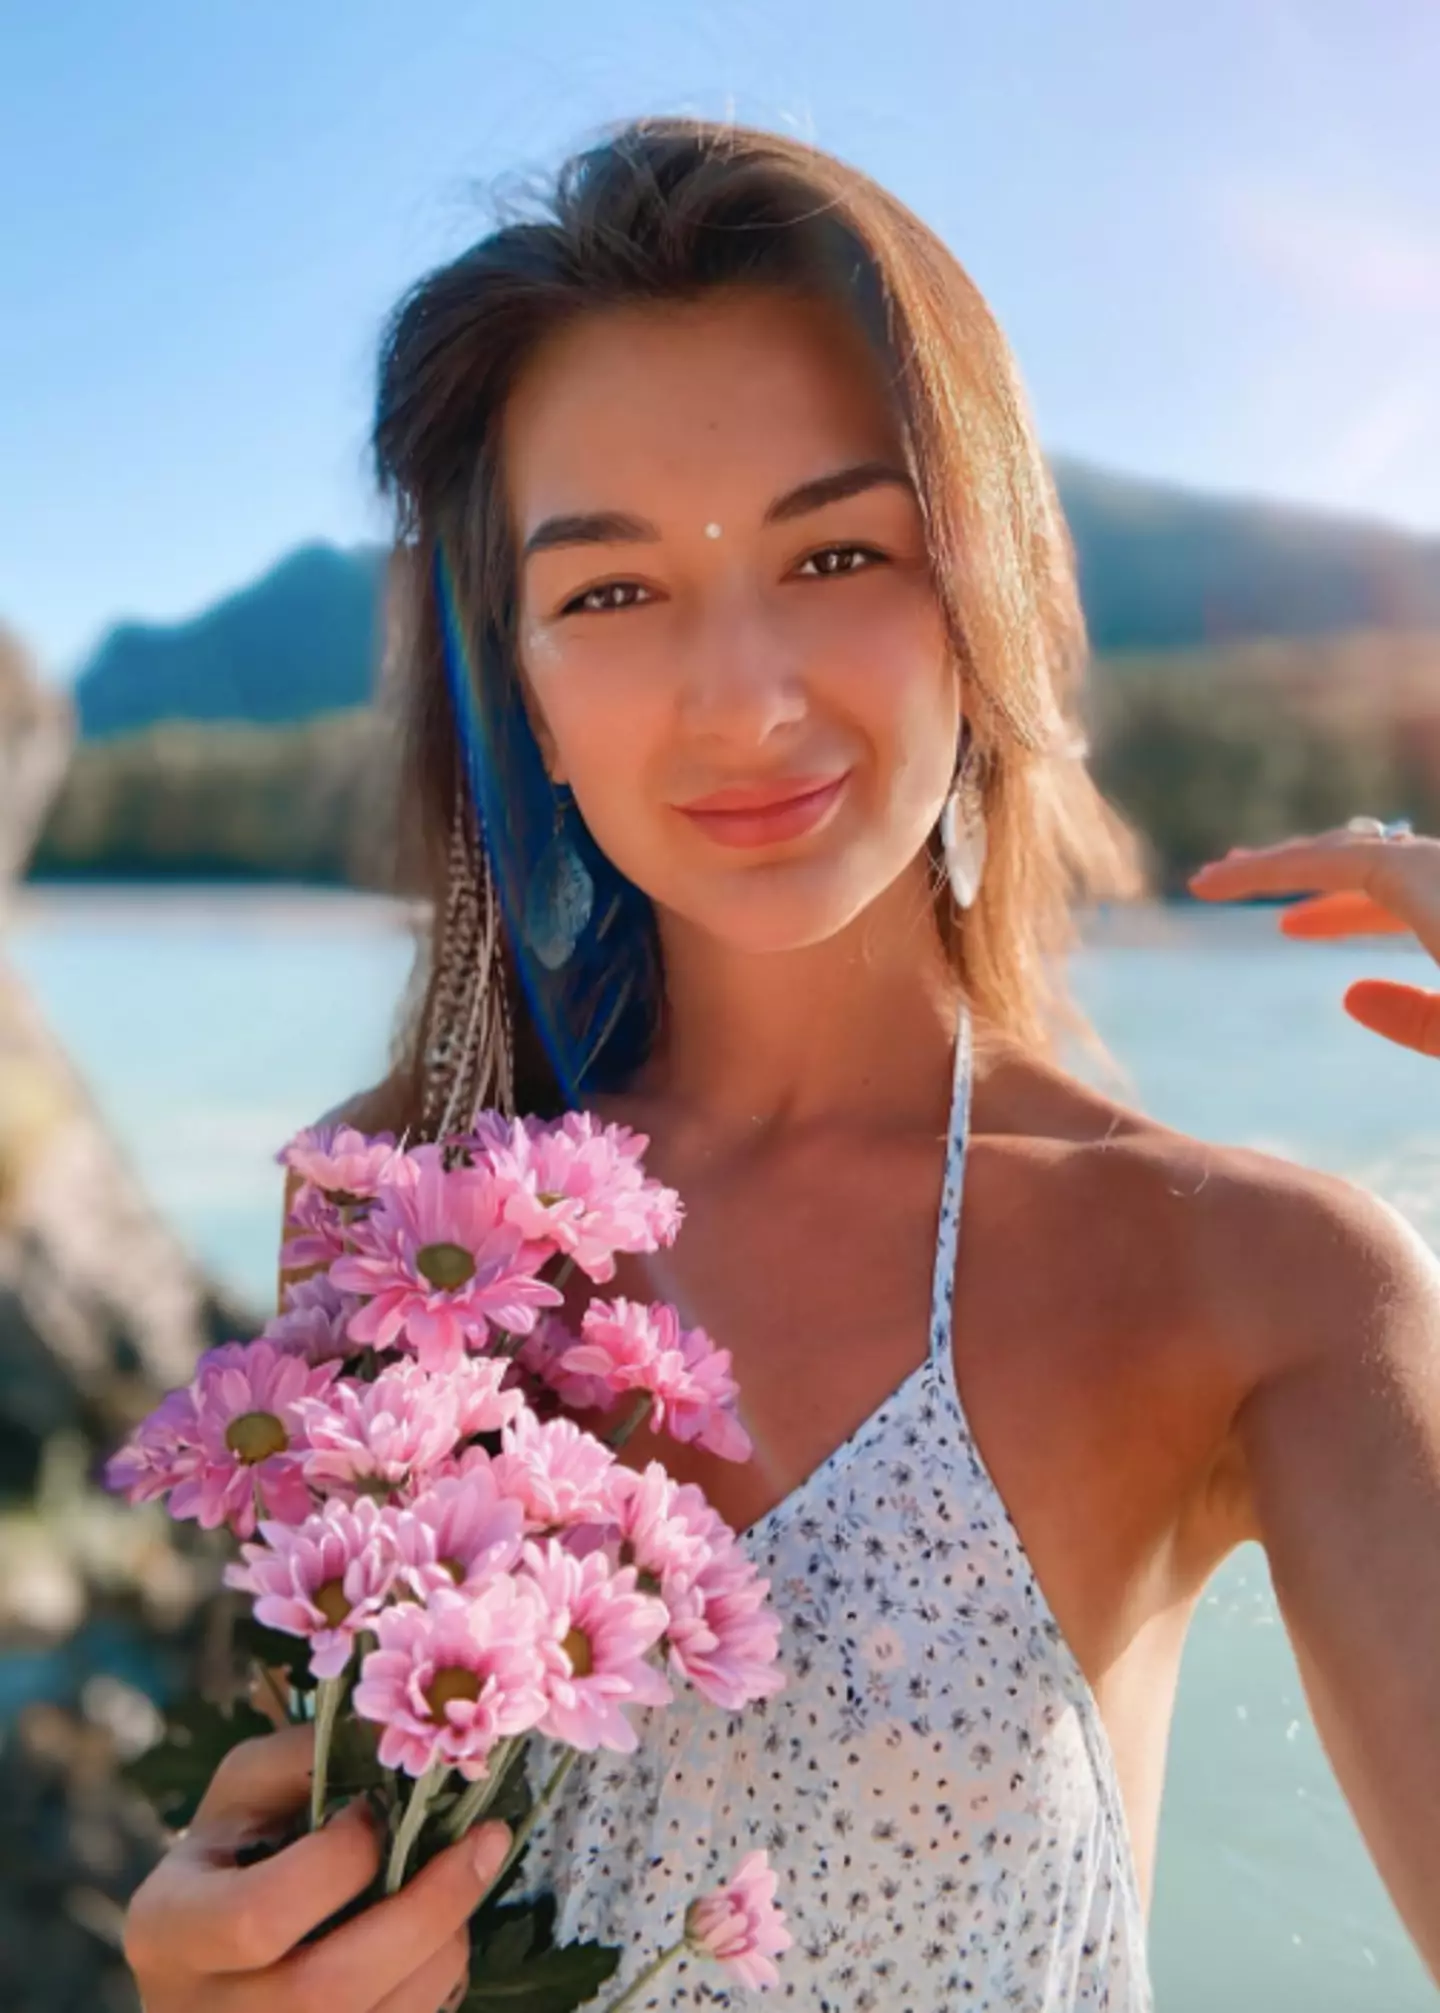 The Instagram star is now banned from returning to Bali for six months.